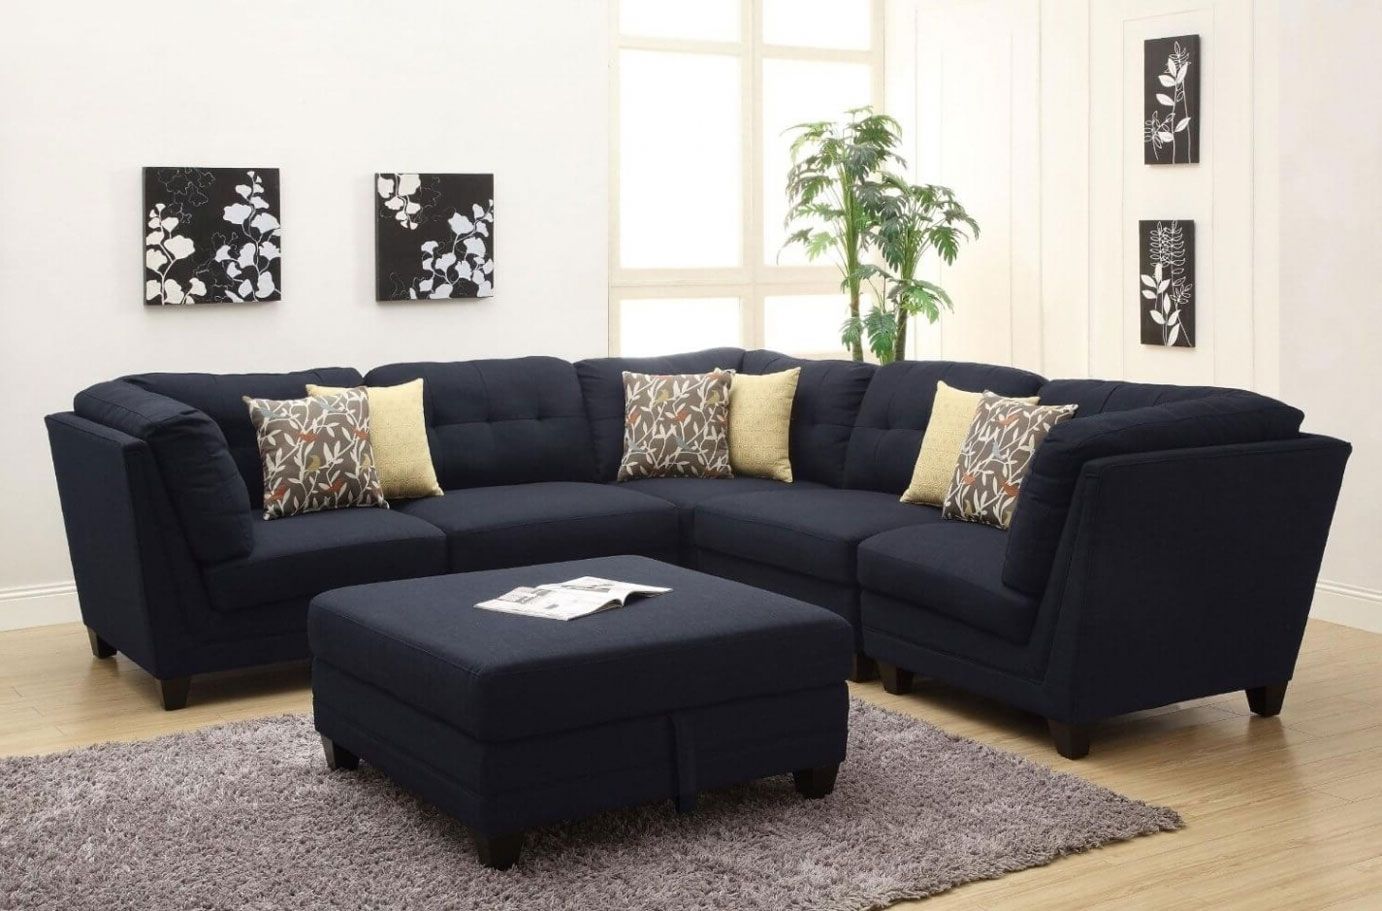 Sectional Sofa: Most Recommended Sectional Sofas Under $1000 Cheap Intended For Grande Prairie Ab Sectional Sofas (View 3 of 10)